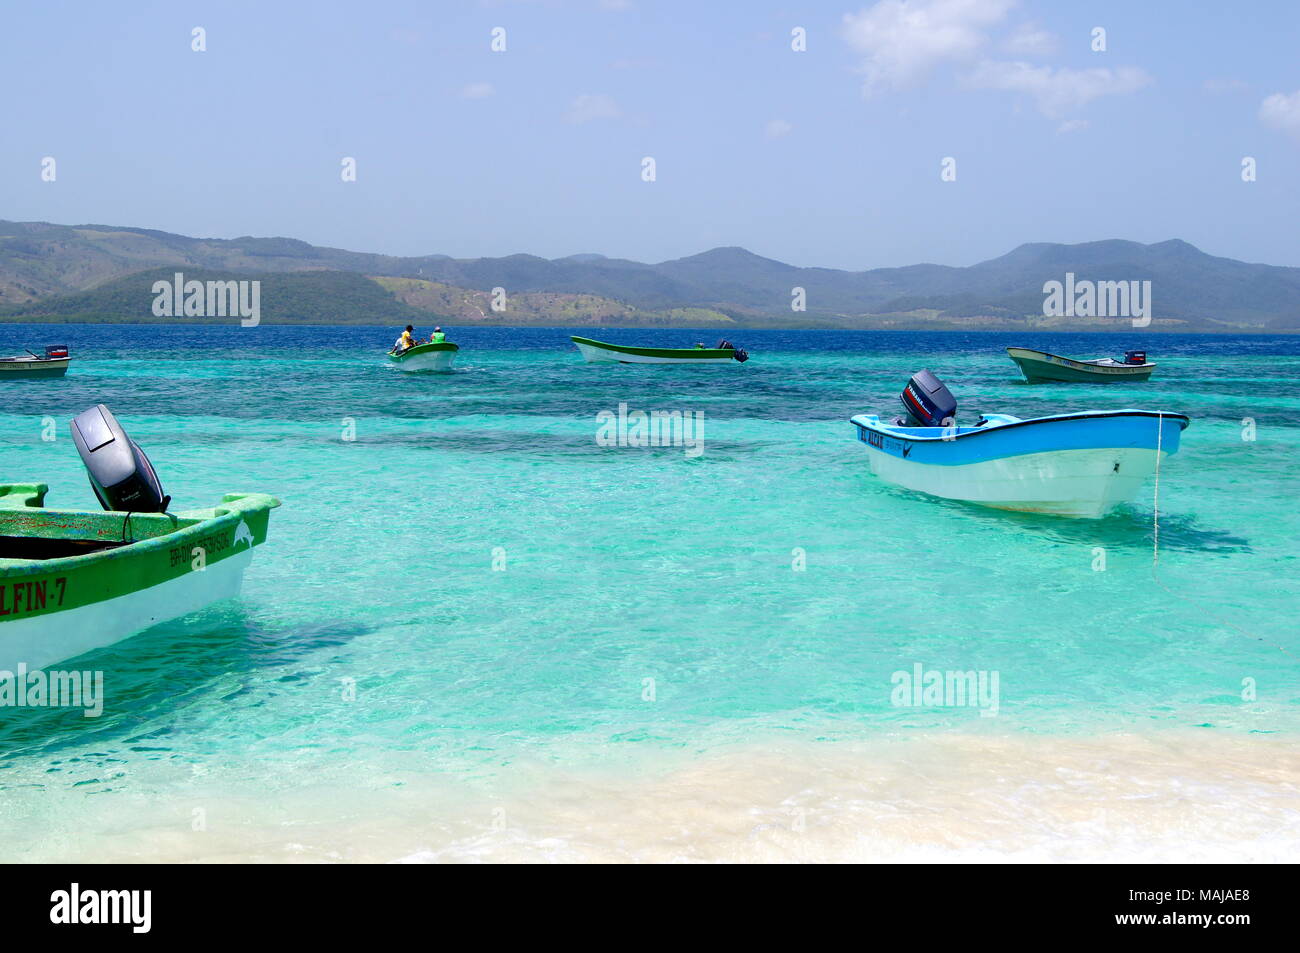 Boats in tropical Dominican Republic Stock Photo